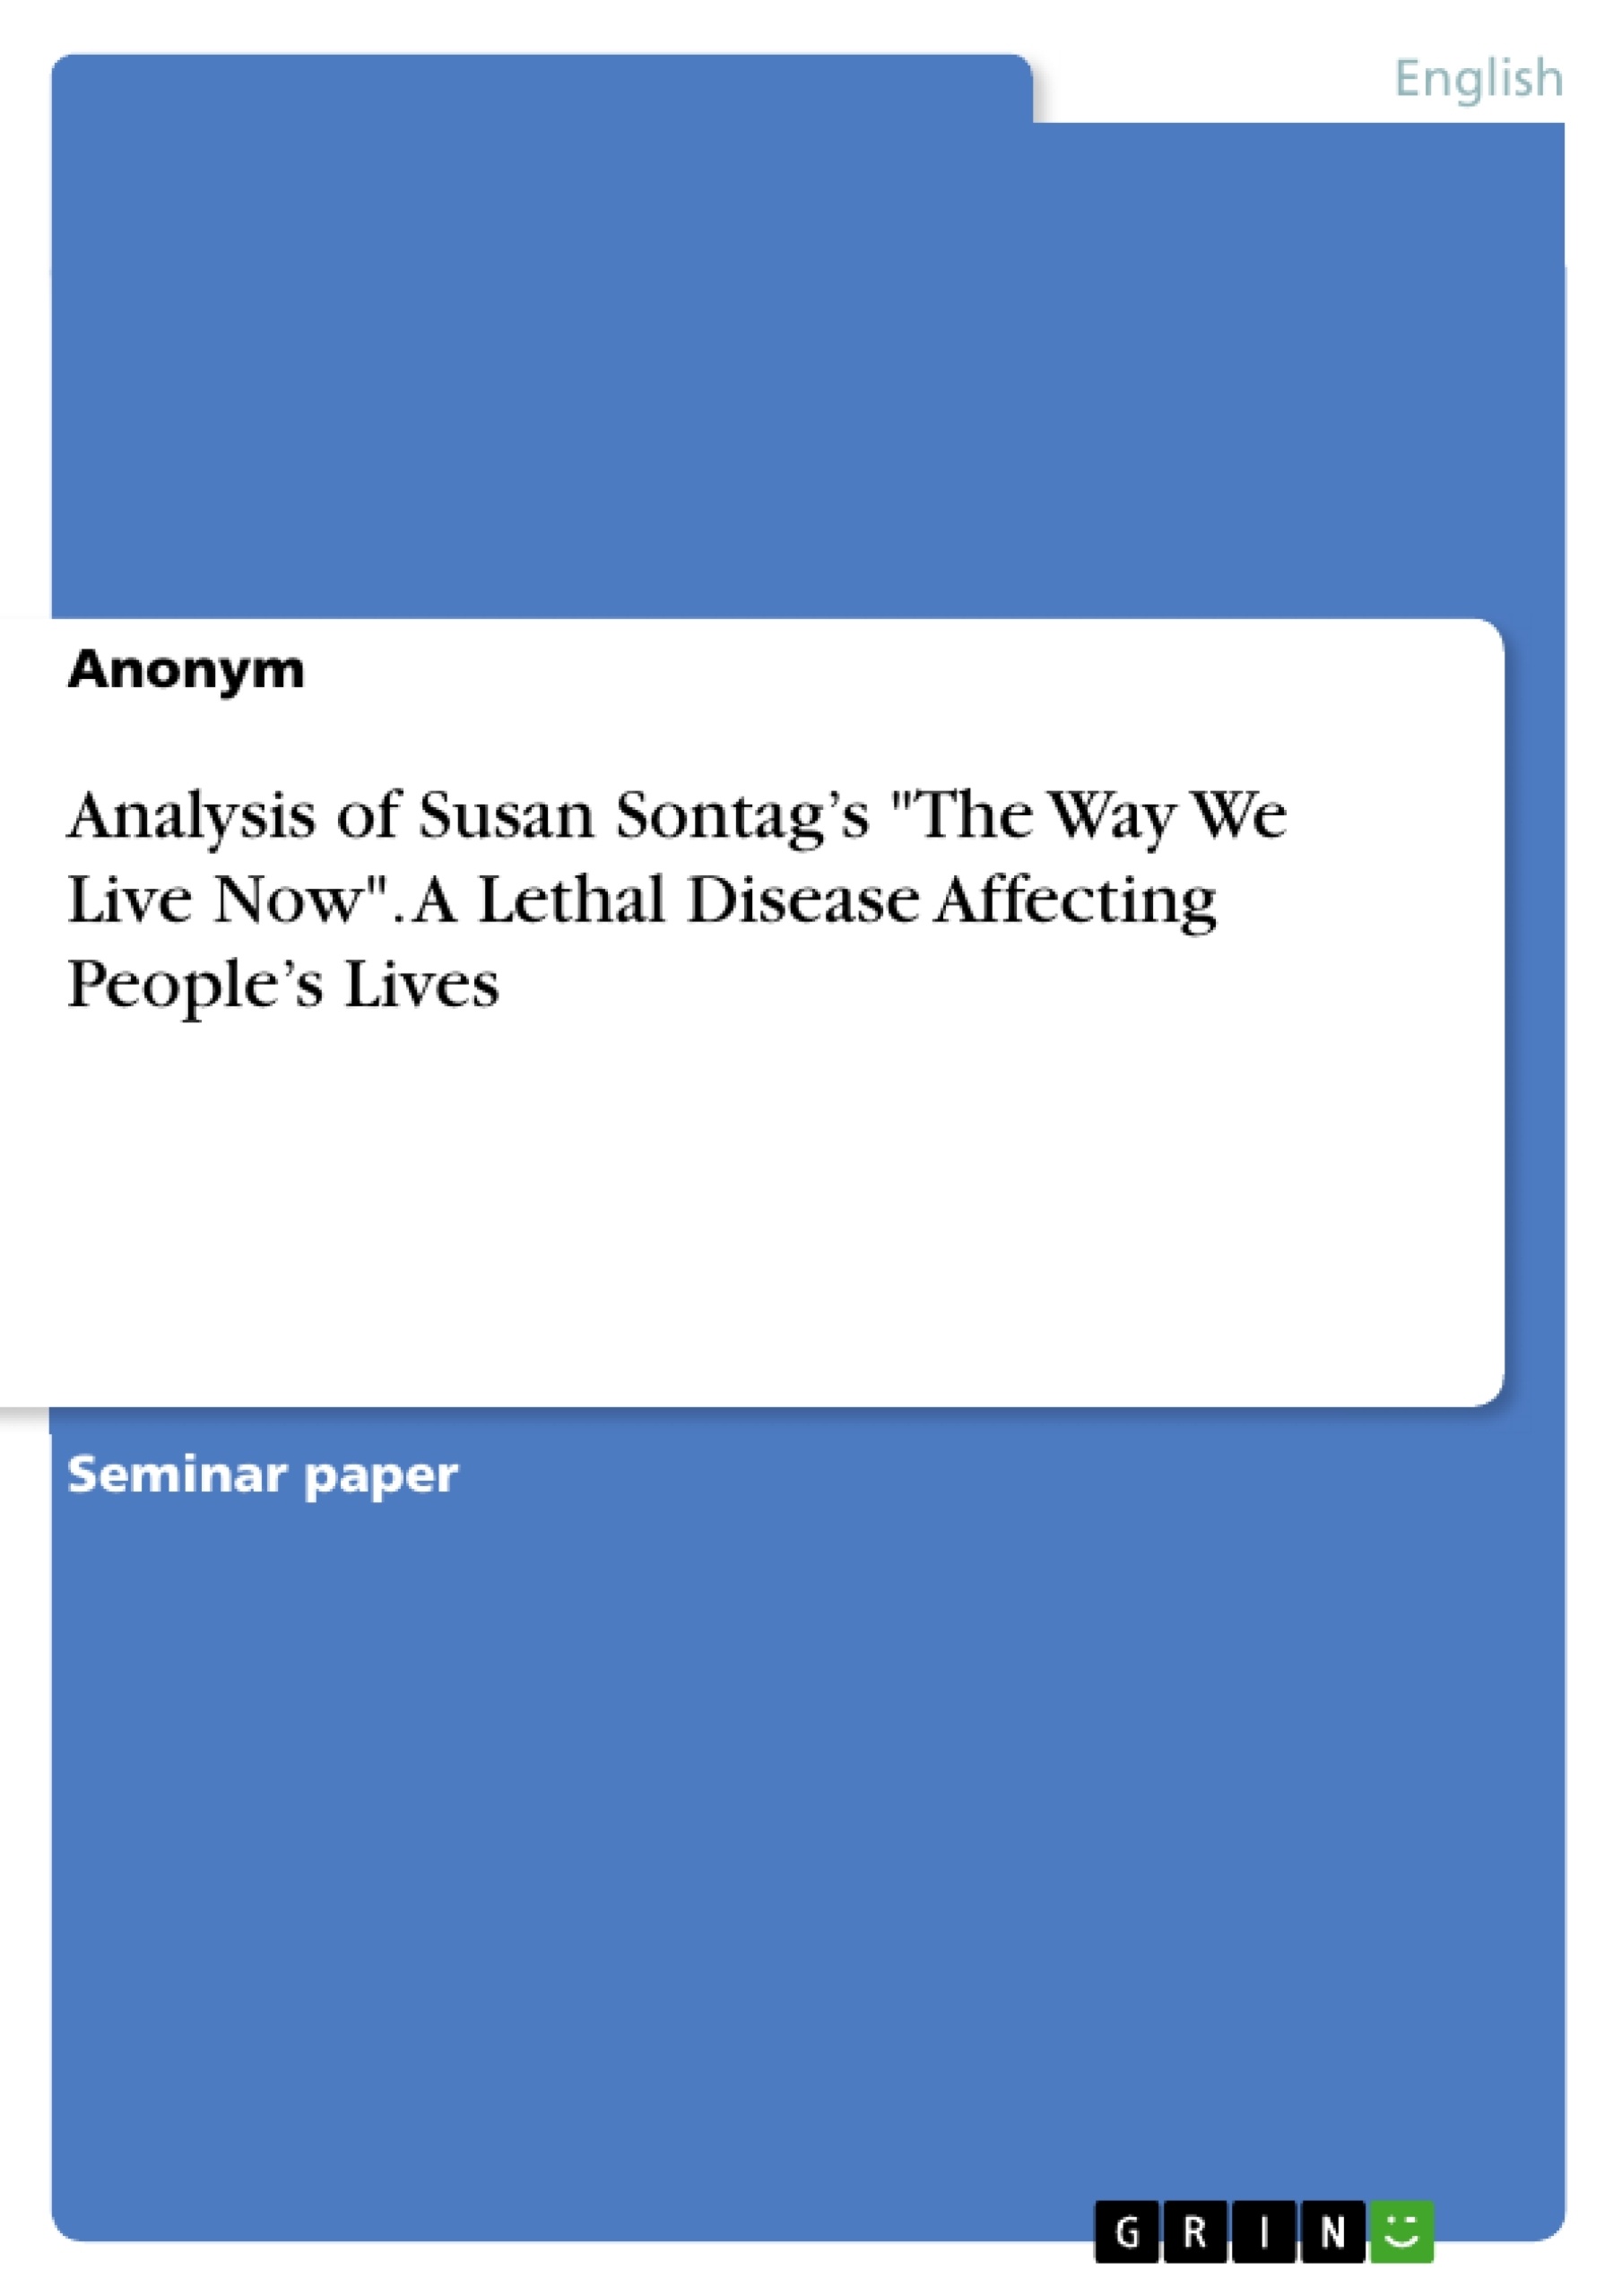 Título: Analysis of Susan Sontag’s "The Way We Live Now". A Lethal Disease Affecting People’s Lives